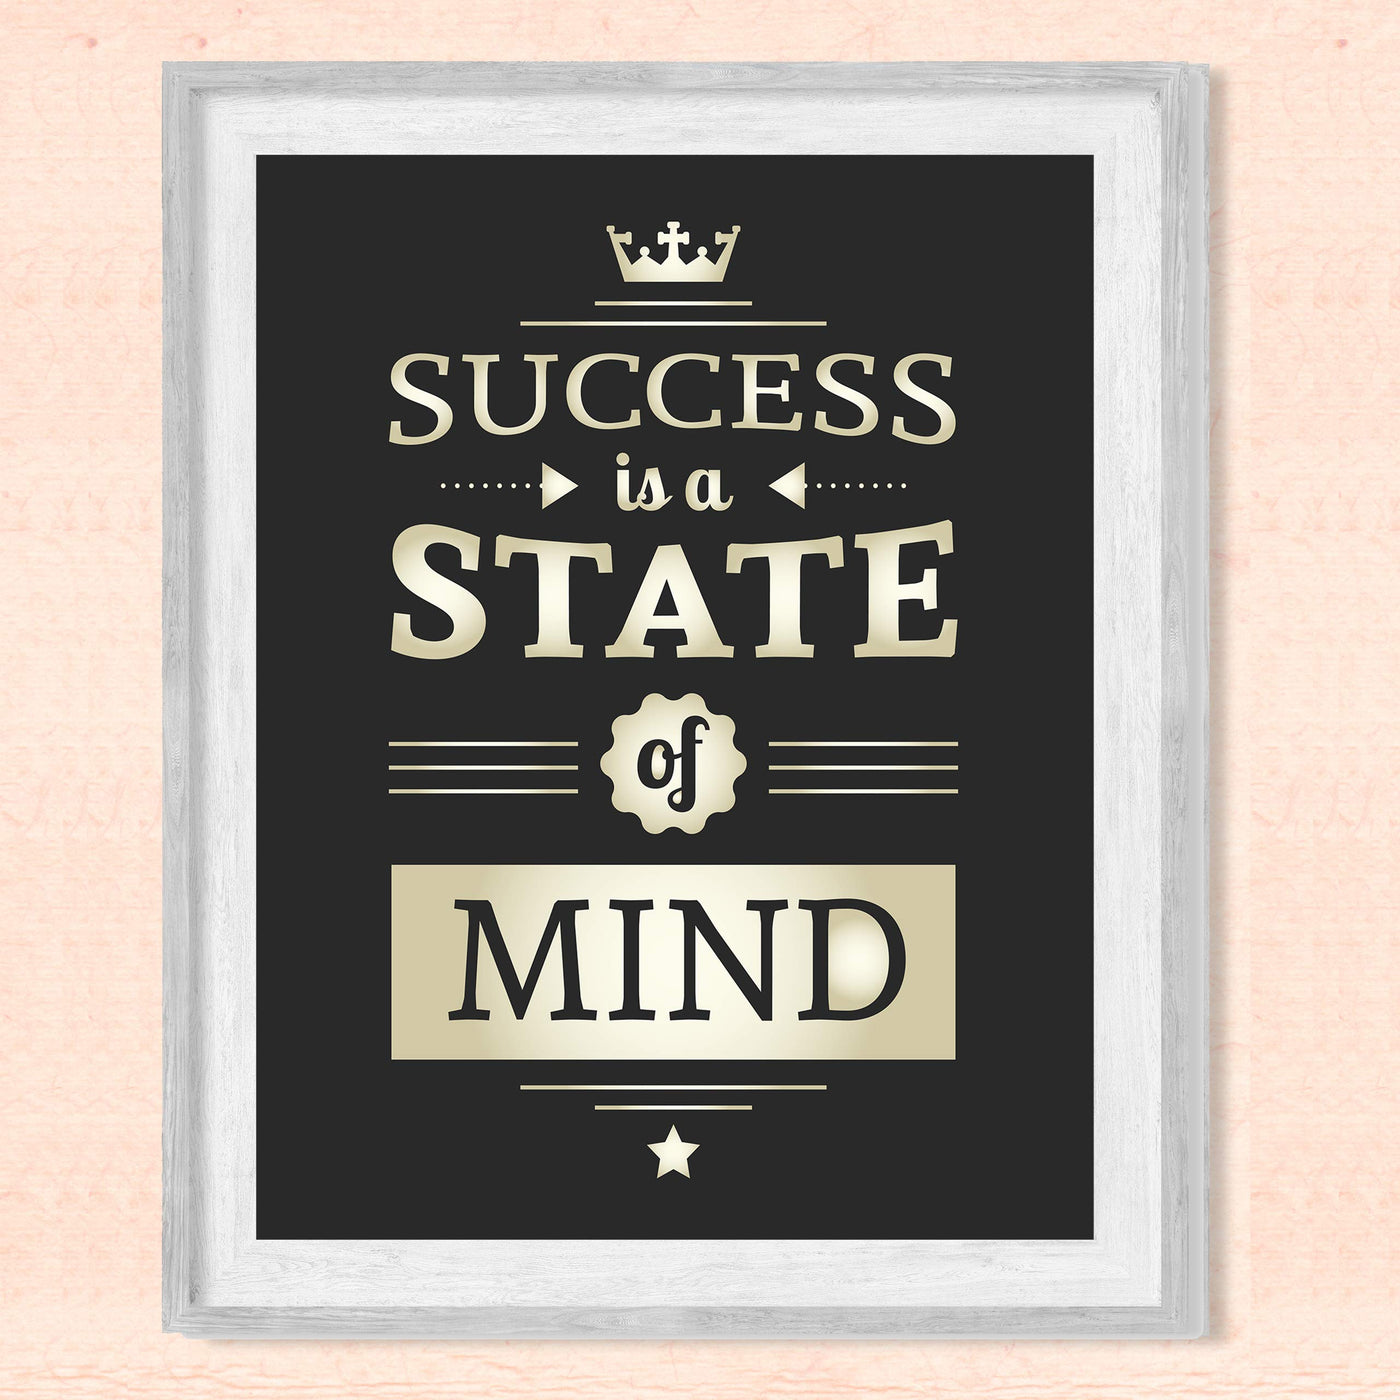 Success is a State of Mind- Positive Quotes-Motivational Wall Art-8 x 10" Poster Print-Ready to Frame. Ideal for Home-Office-School-Gym-Sales D?cor. Inspire & Coach Your Team to Successful Thinking!